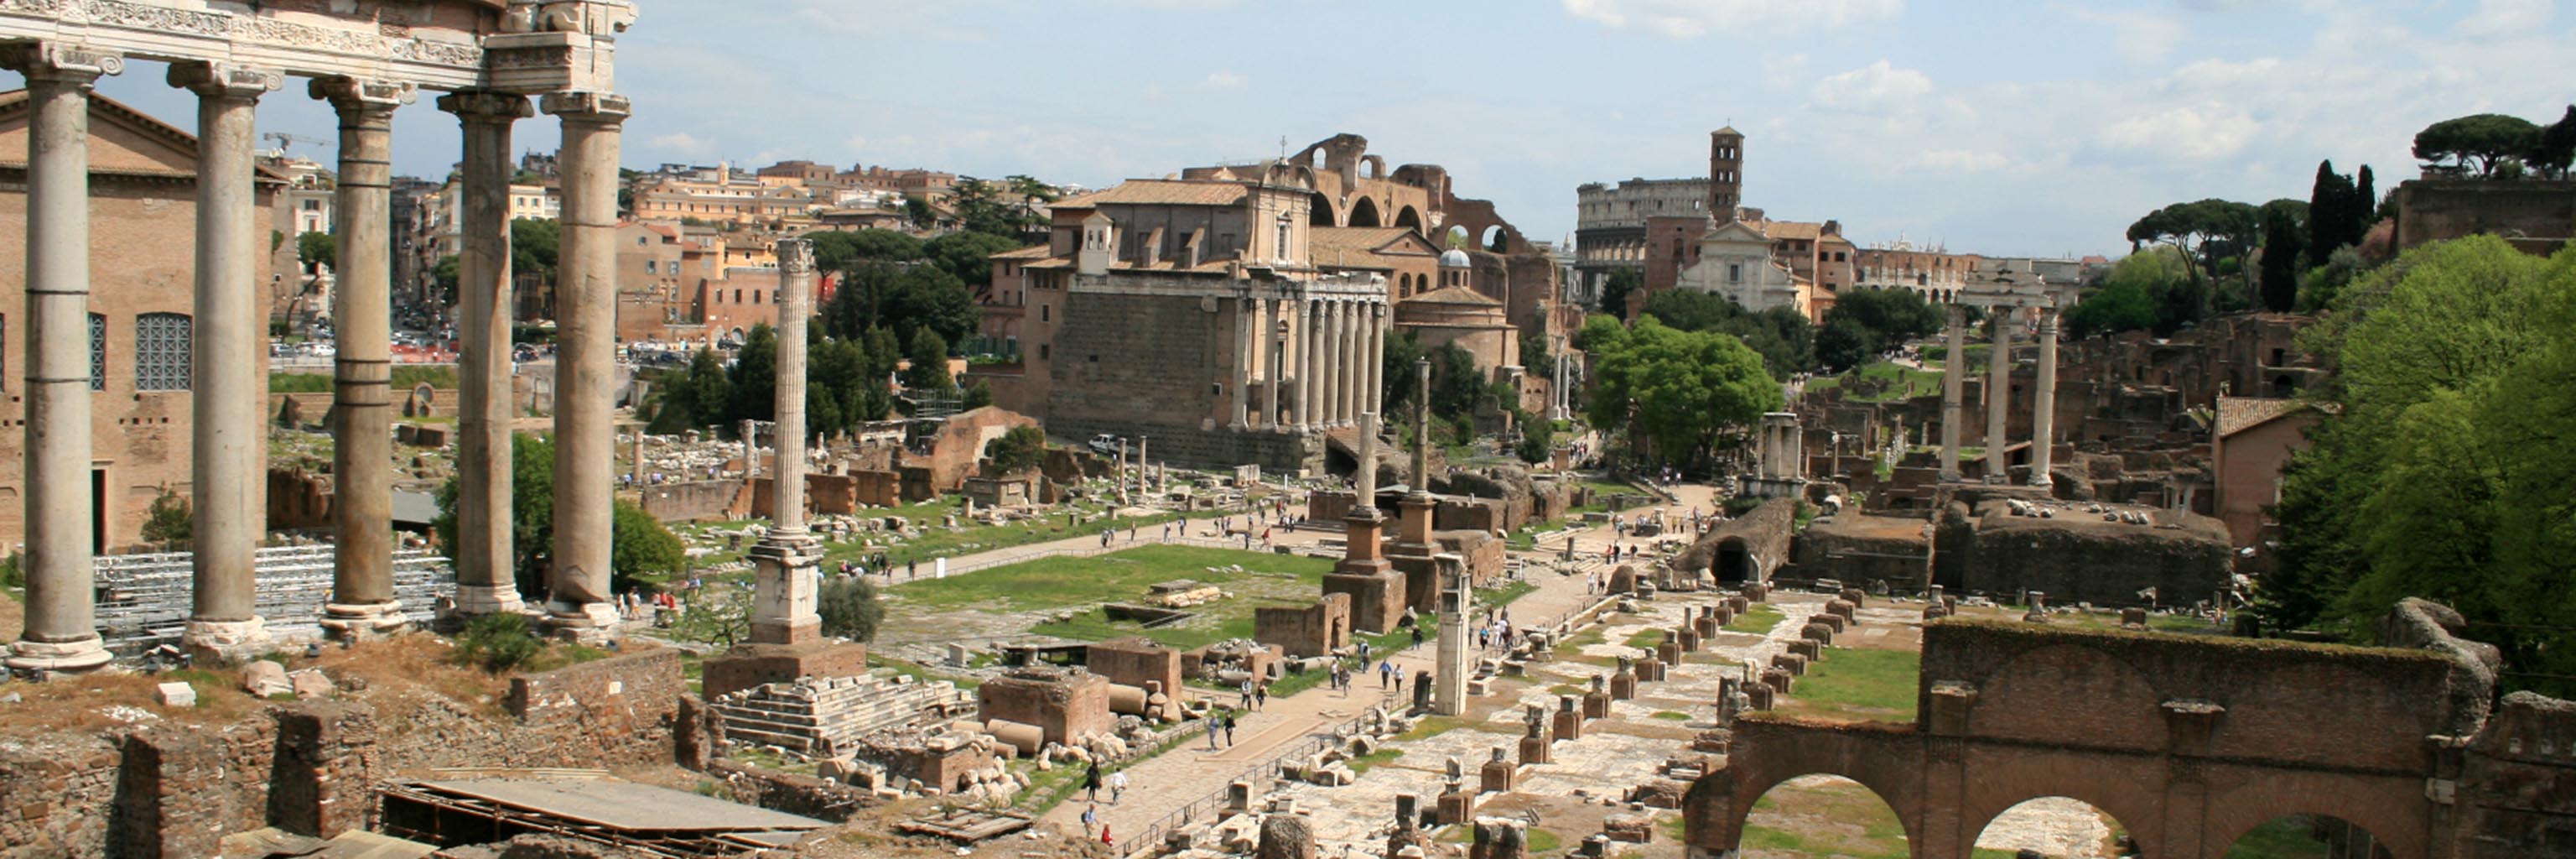 The Forum in Rome, Italy